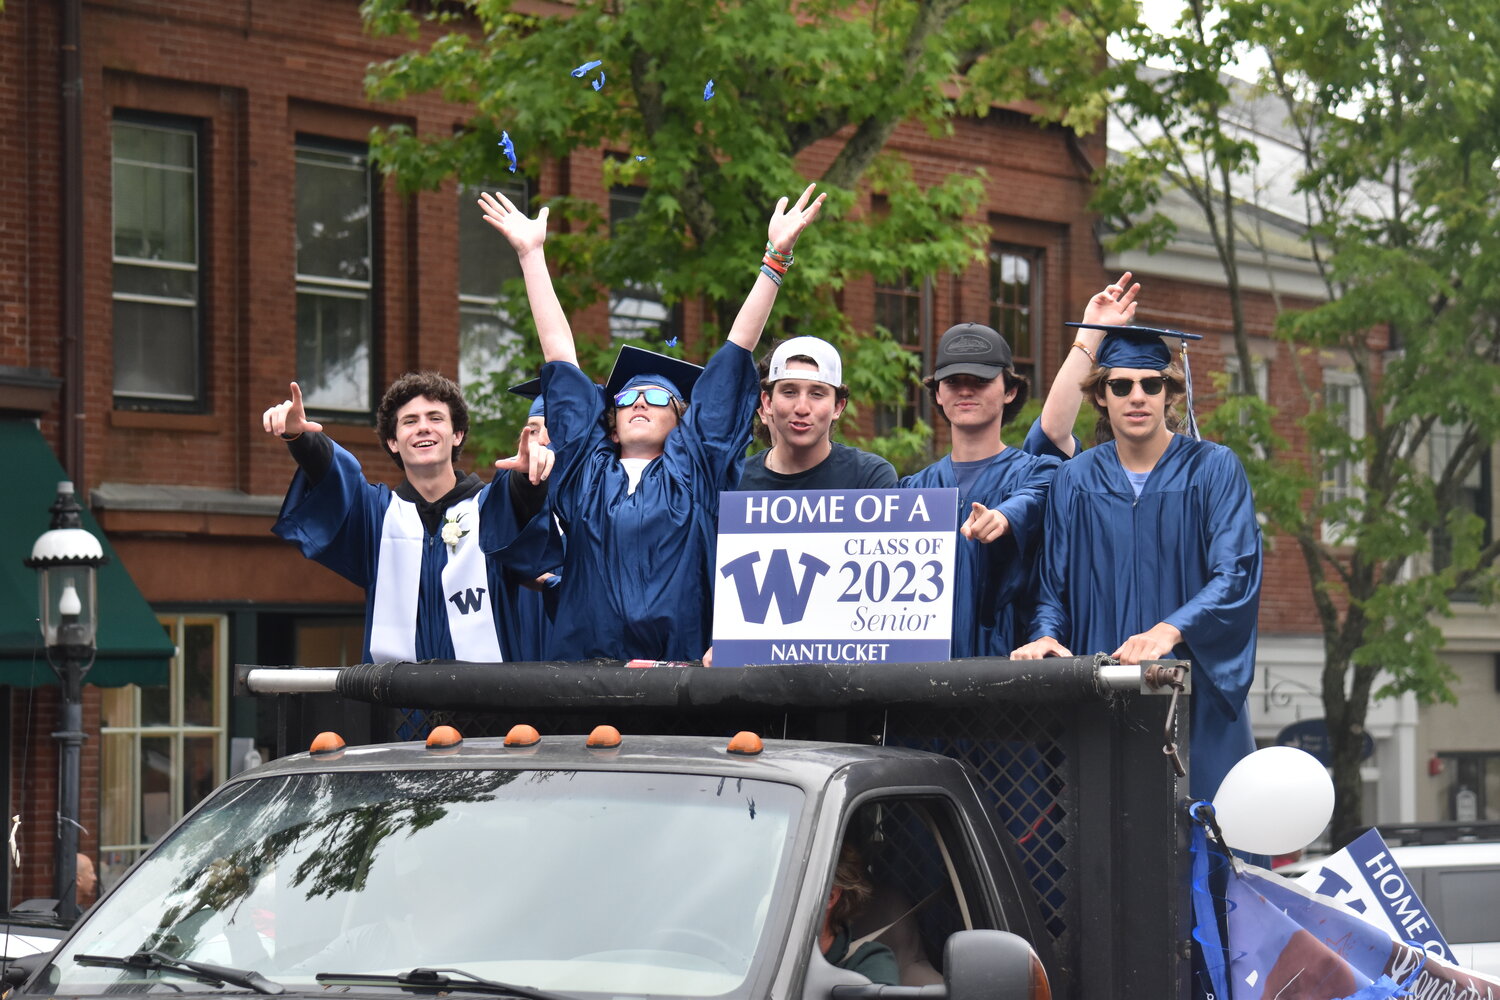 The senior parade was held Saturday afternoon.